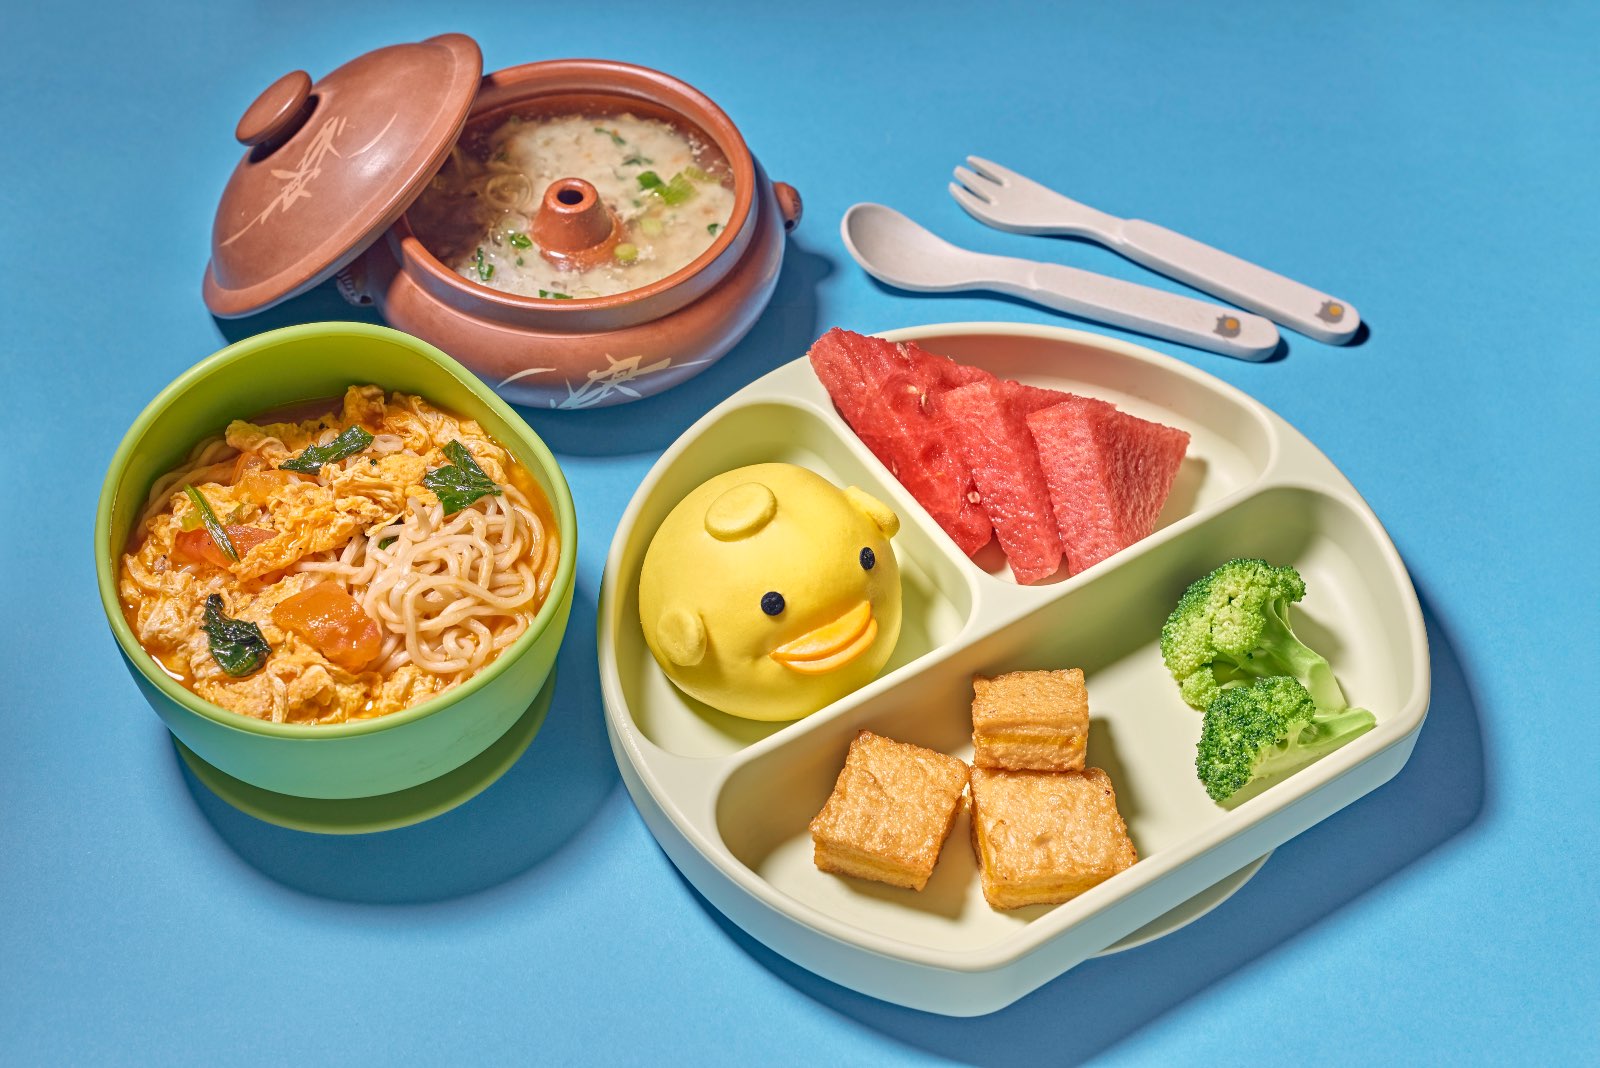 , Yun Nans’ dedicated kids menu delivers nutritious foods and interactive learning activities